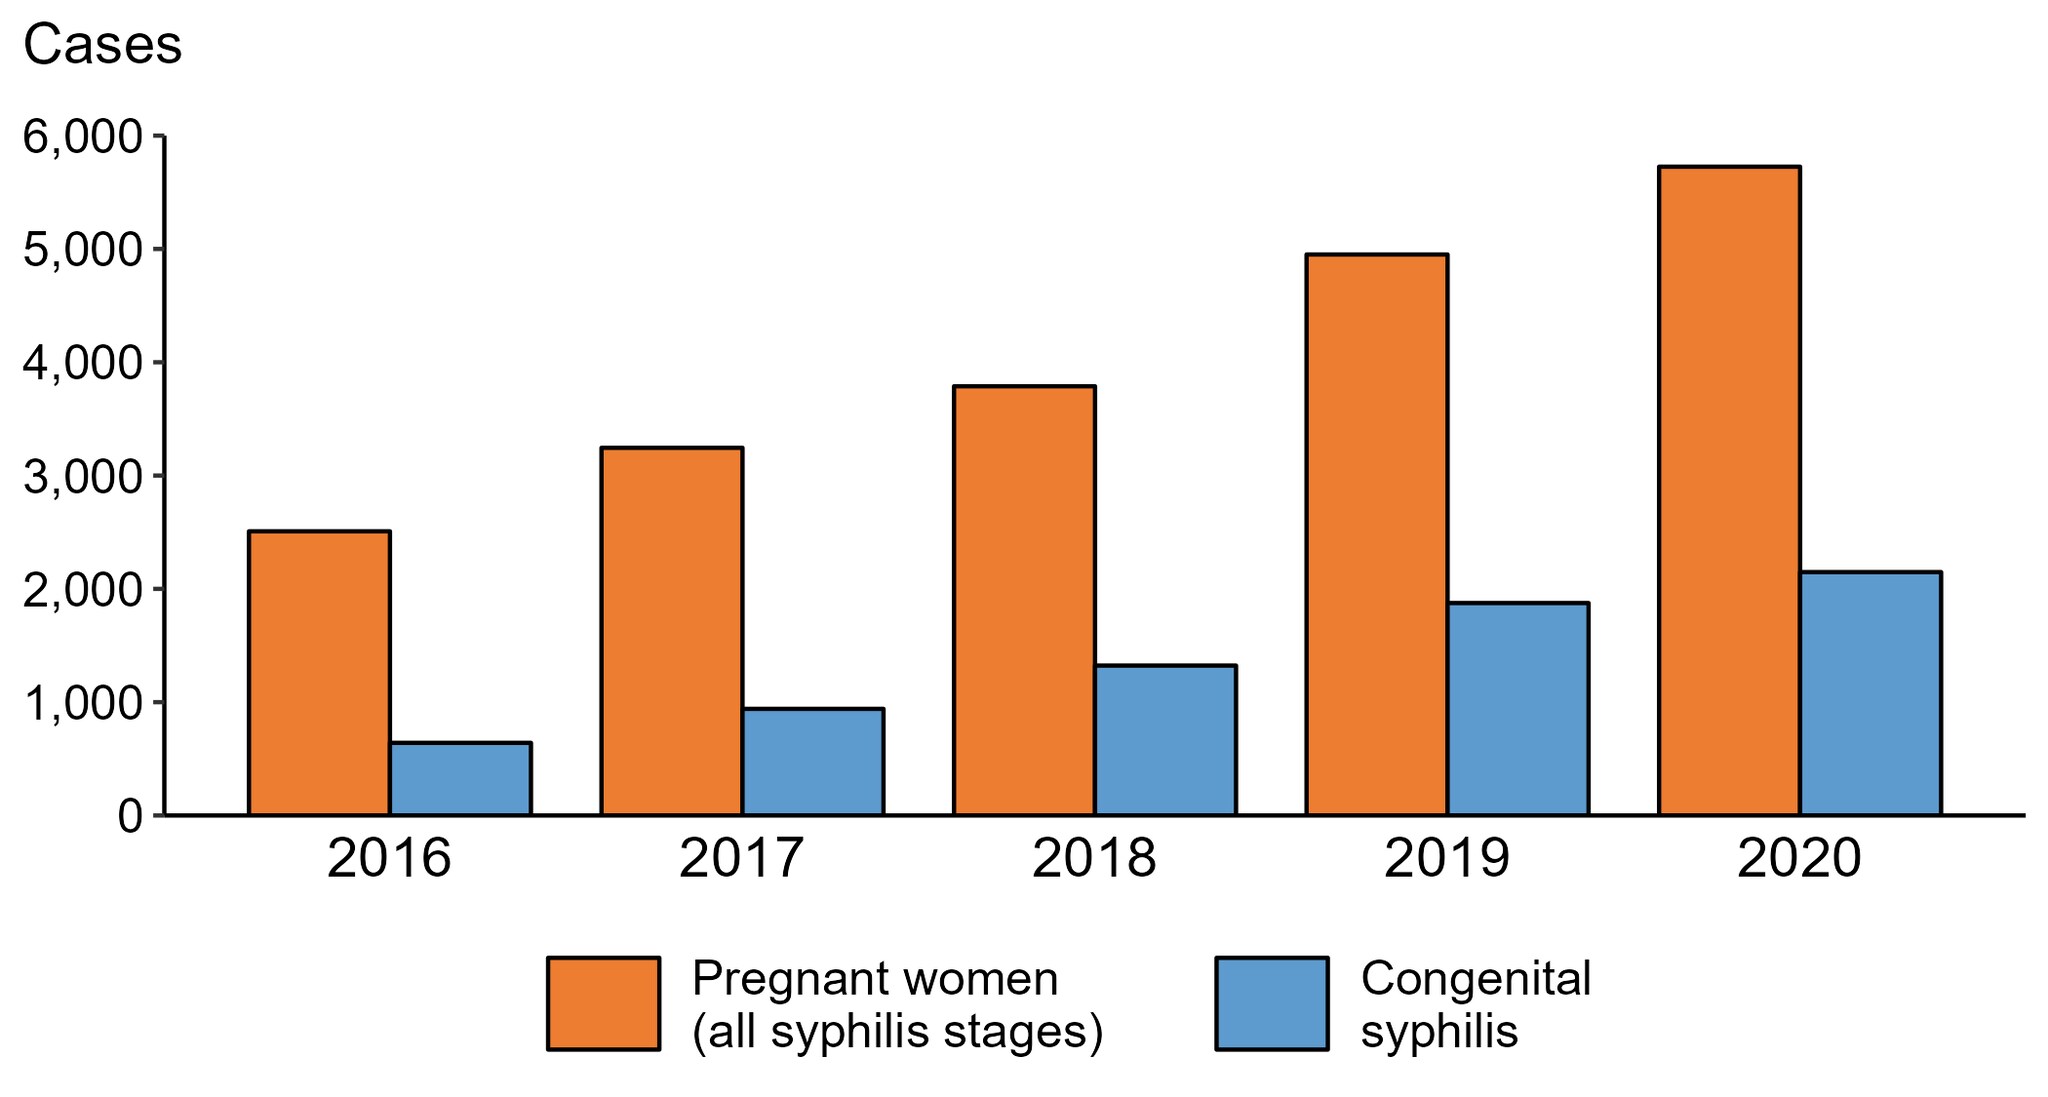 Bar graph showing reported cases of congenital syphilis by year of birth and rates of reported cases of primary and secondary syphilis among women aged 15 to 44 years in the United States from 2011 to 2020.